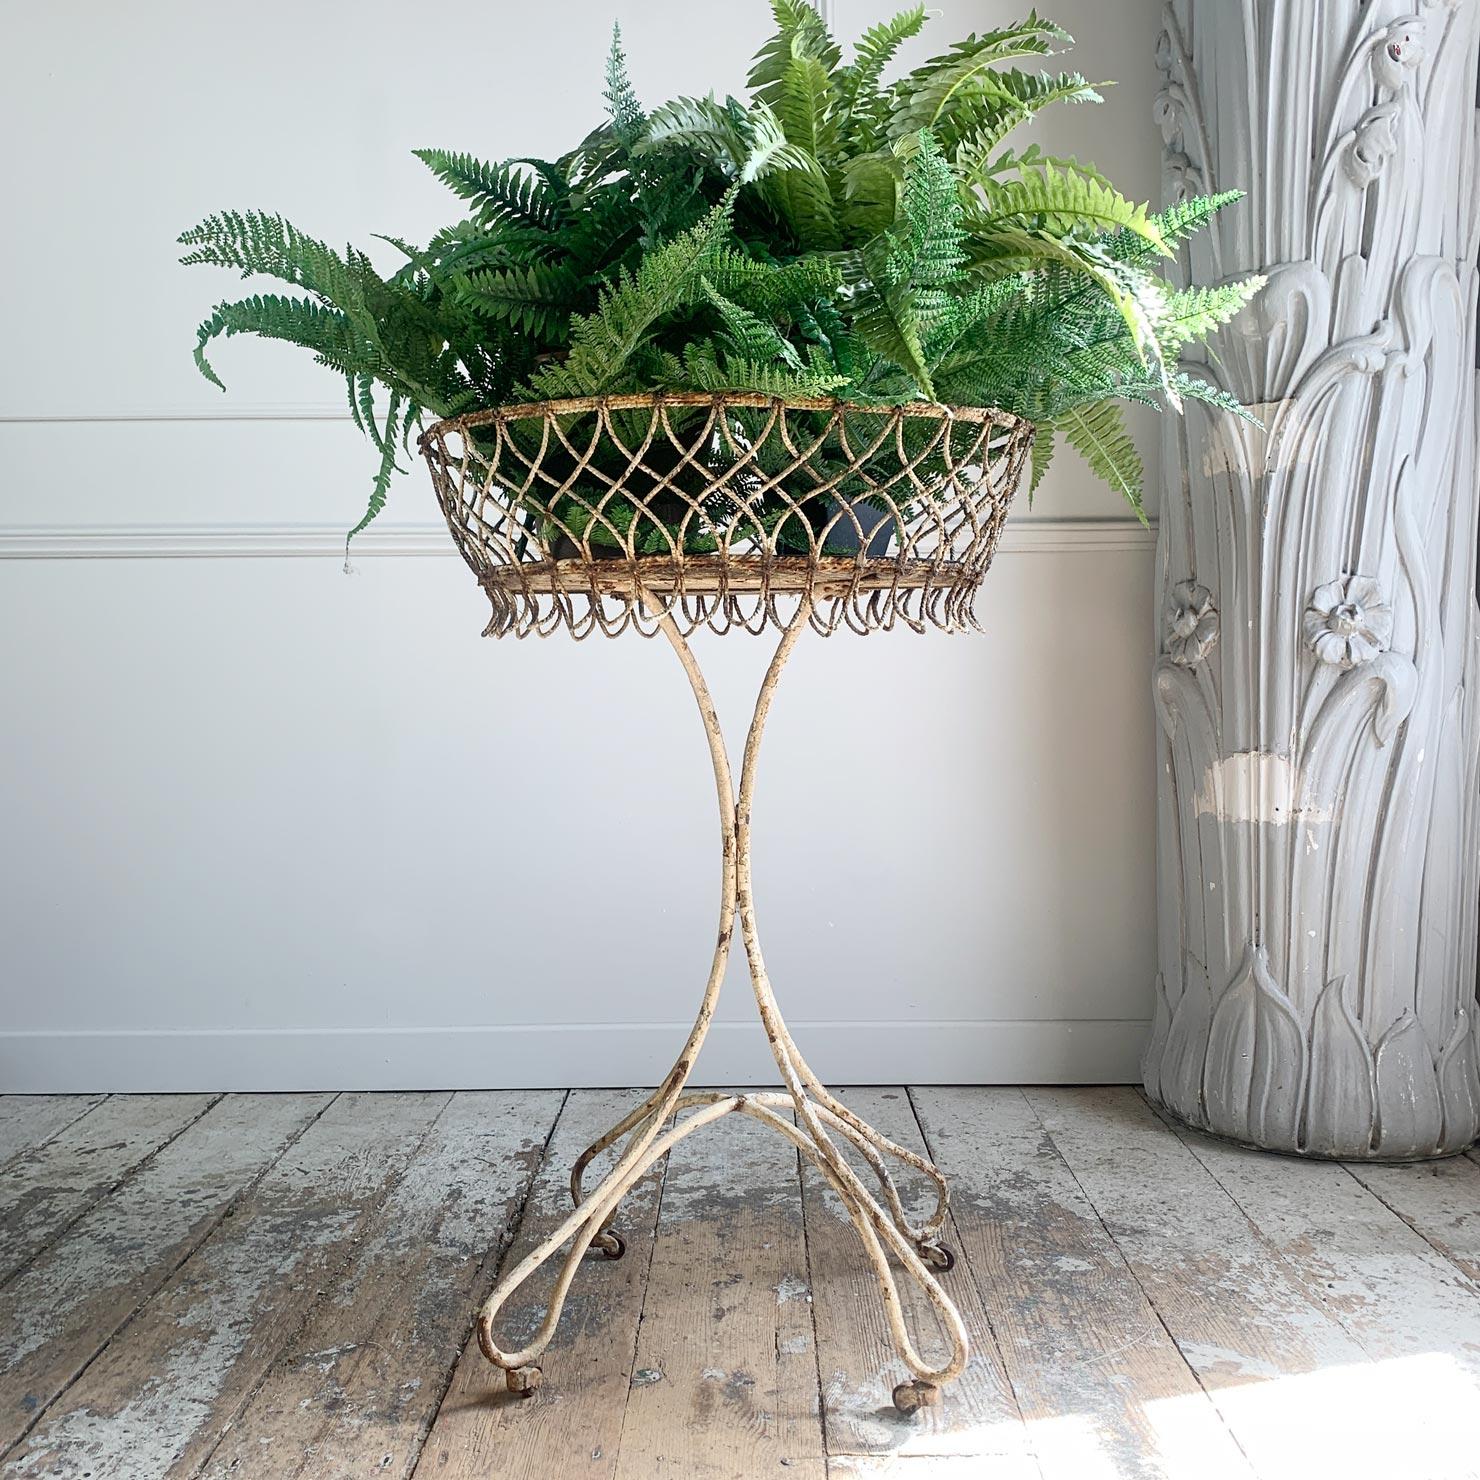 A very pretty French wirework and wrought iron plant stand, with wooden base and brass castors

Circa 1920-1930. Lovely old paint patina to the legs and age related wear to the wirework twists.

Measures: Height 88cm x Depth 45cm

Basket 59cm